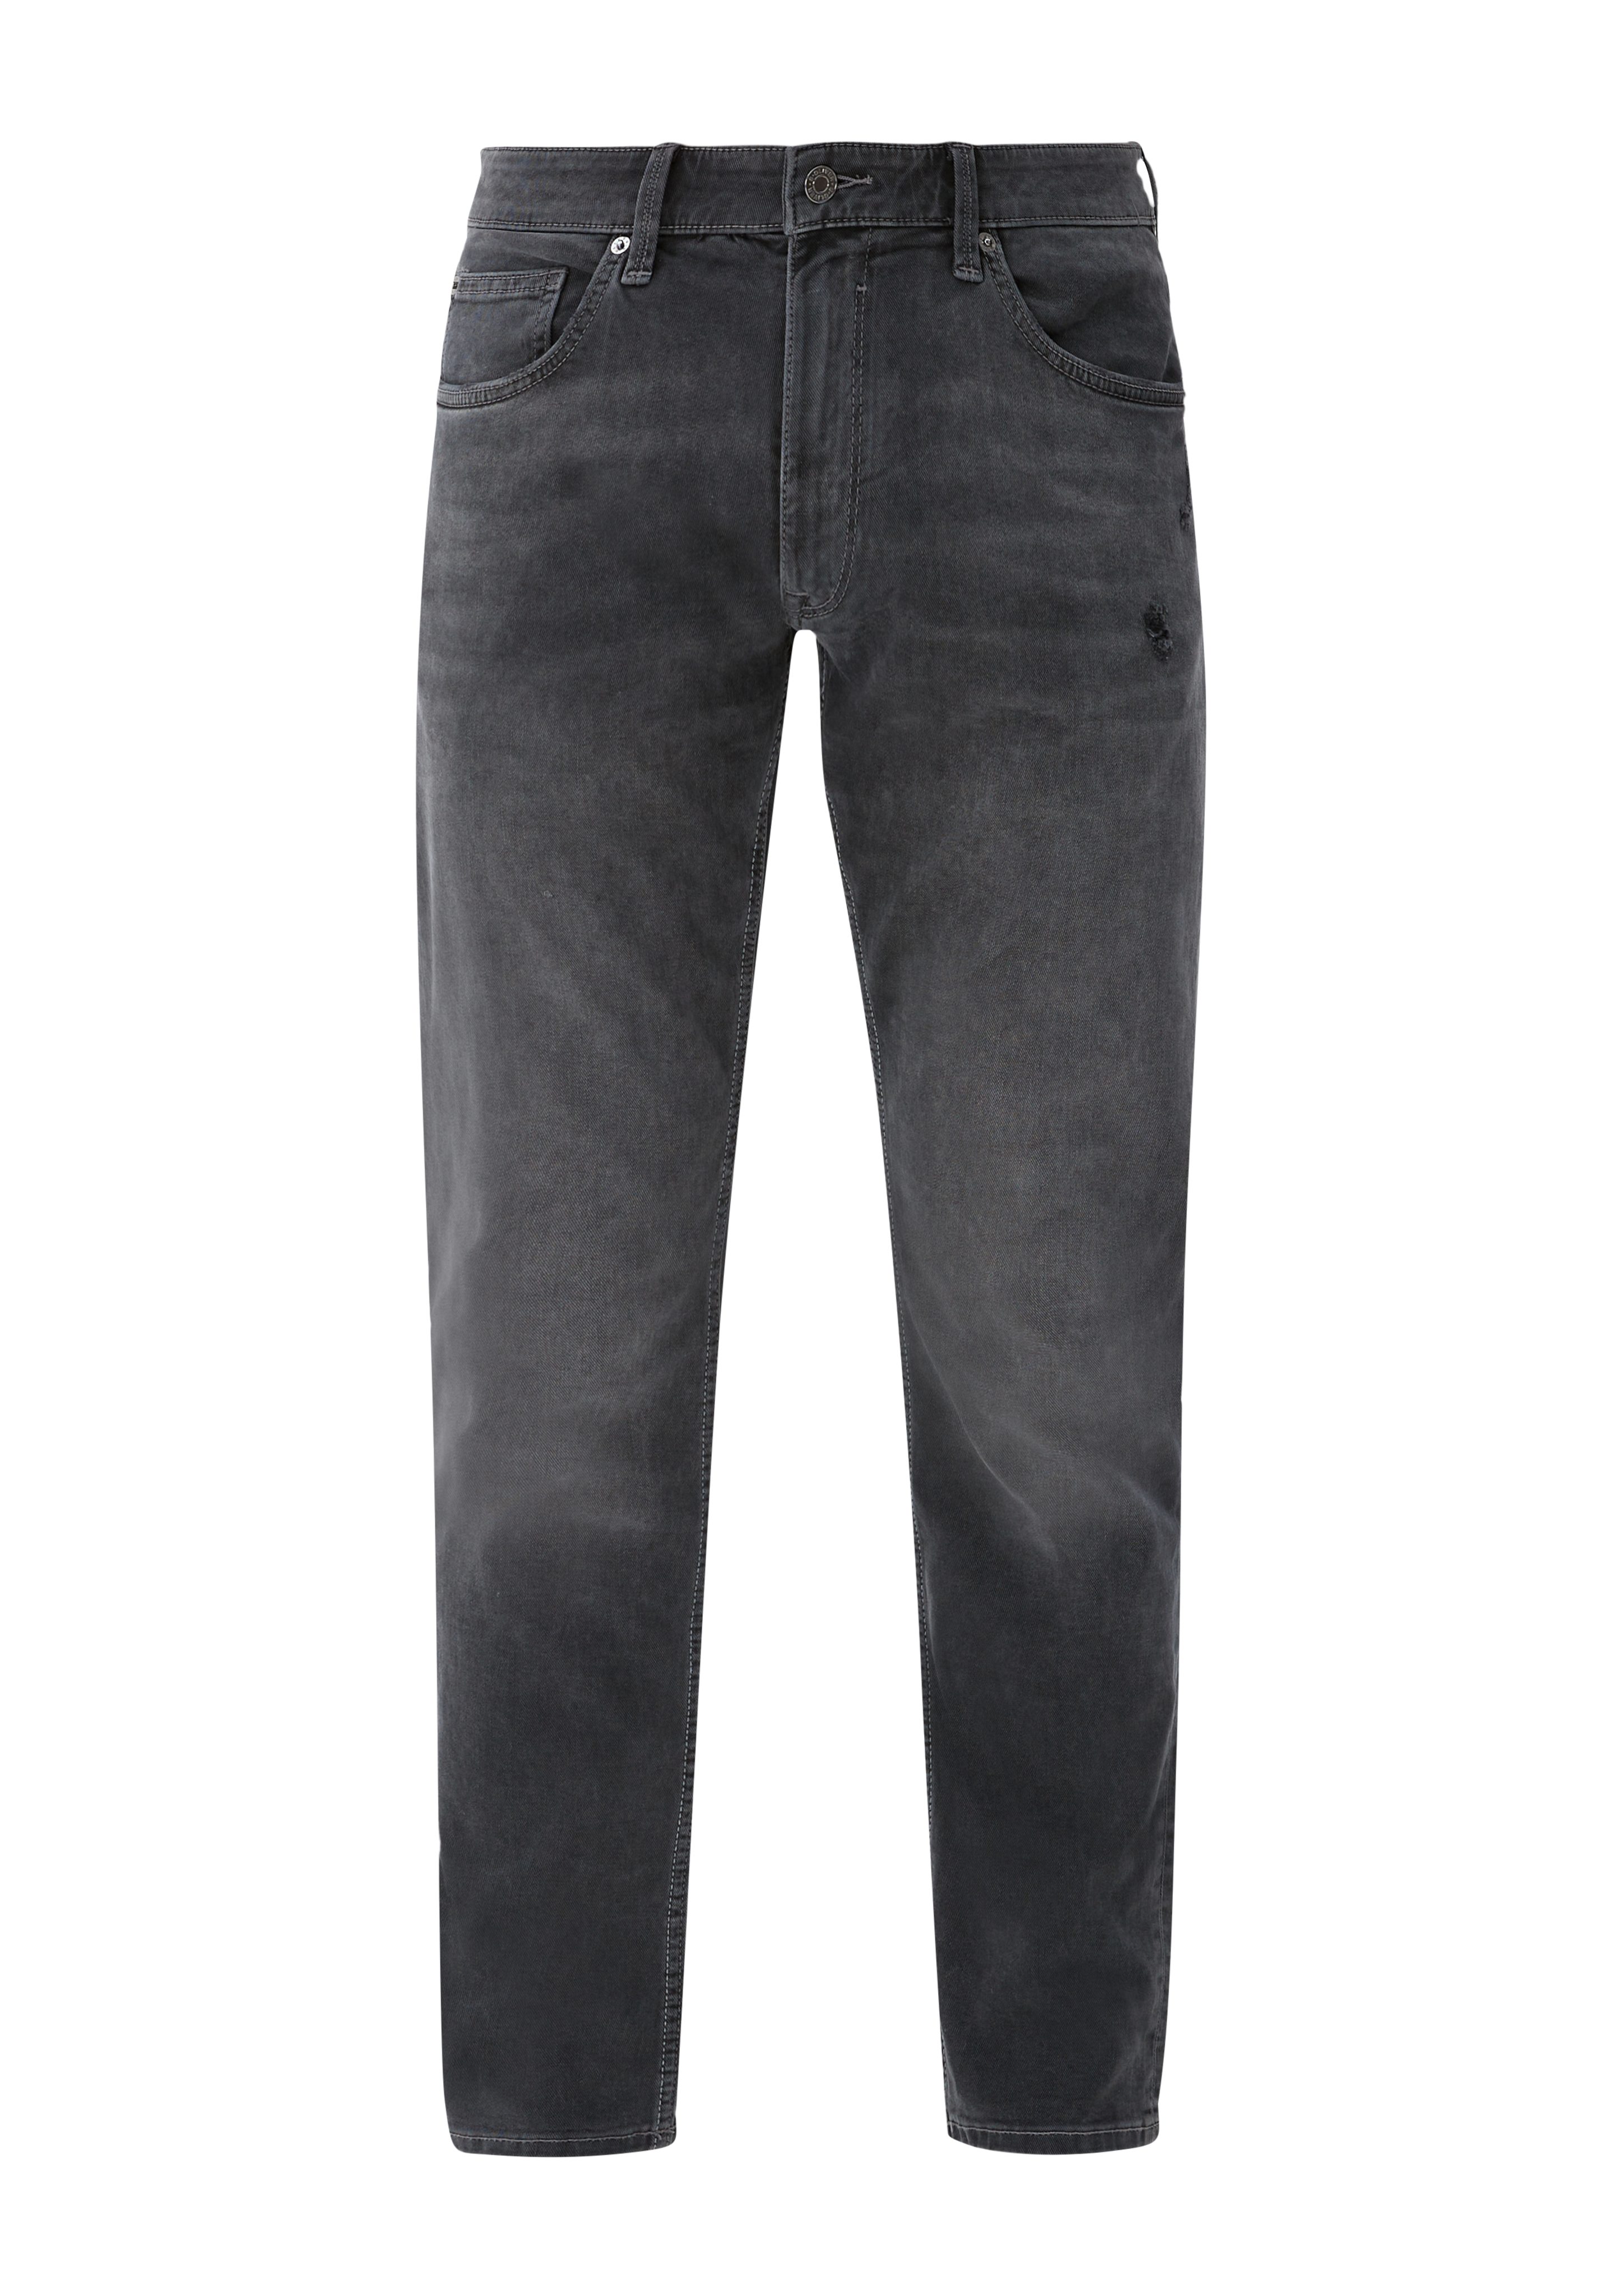 Waschung / / Rise Jeans Slim Mid Leg Stoffhose Keith Slim: s.Oliver / Fit